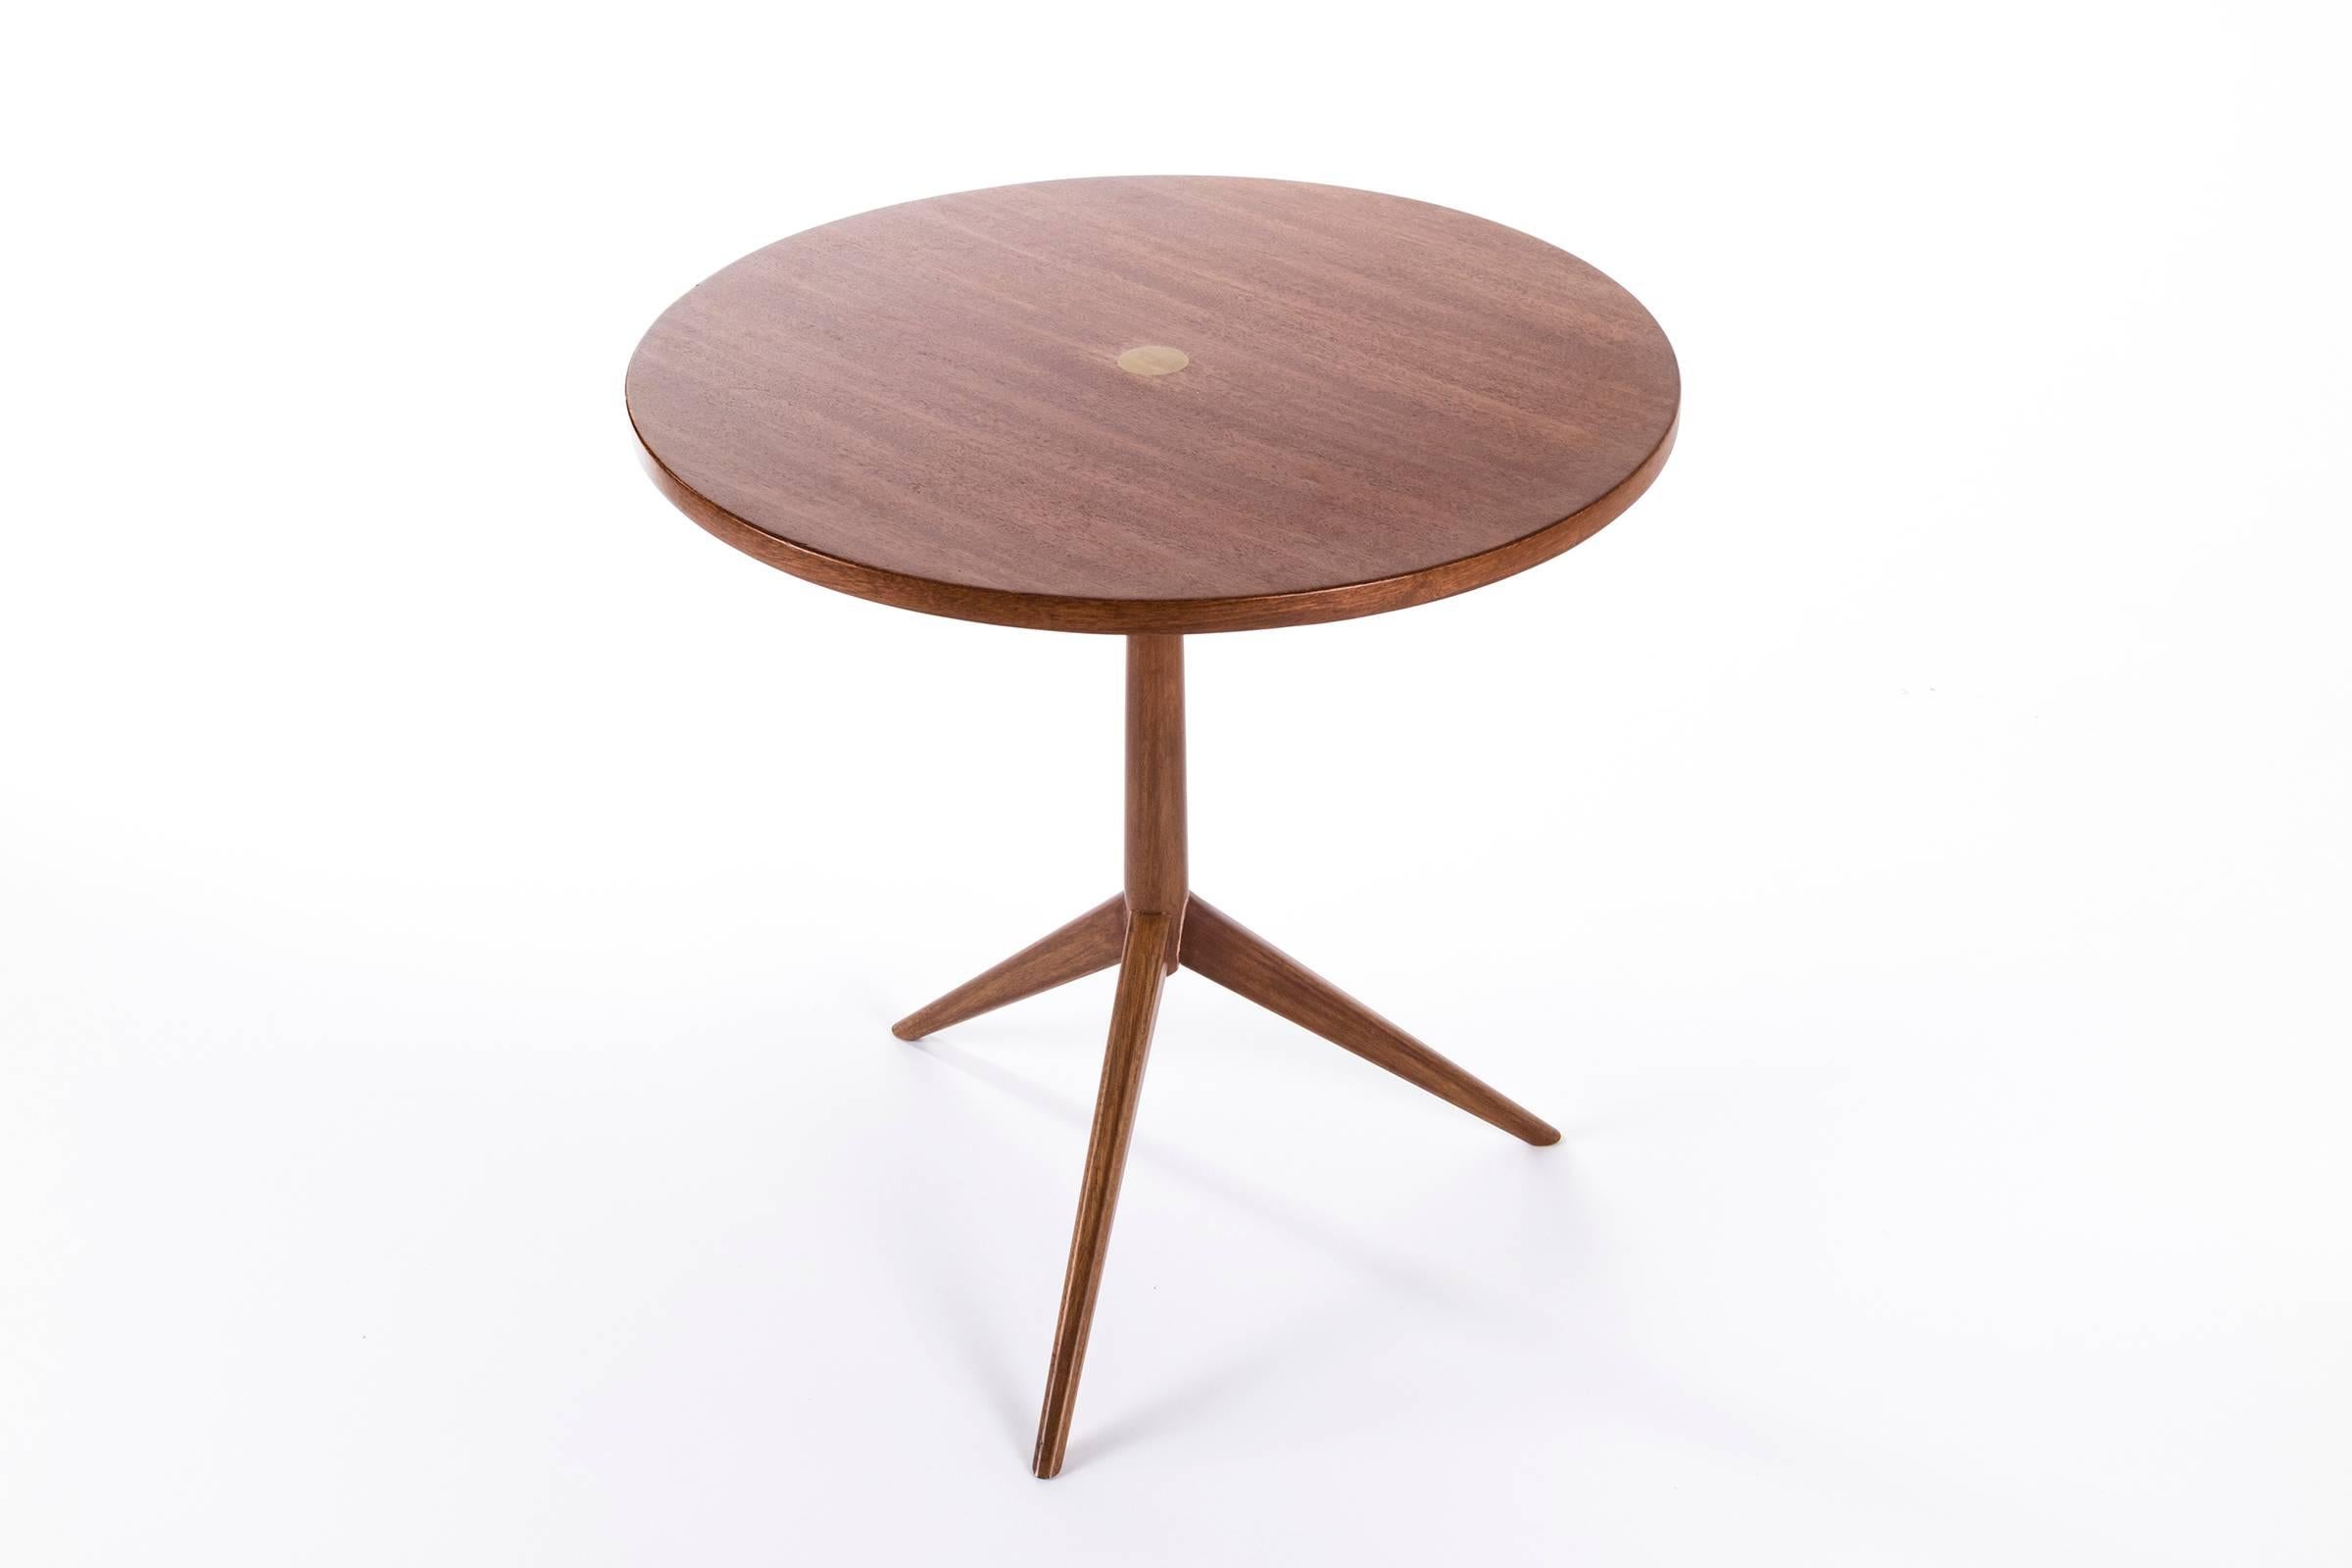 Paul McCobb occasional table, model 70008.
Bleached mahogany wood with brass insert.